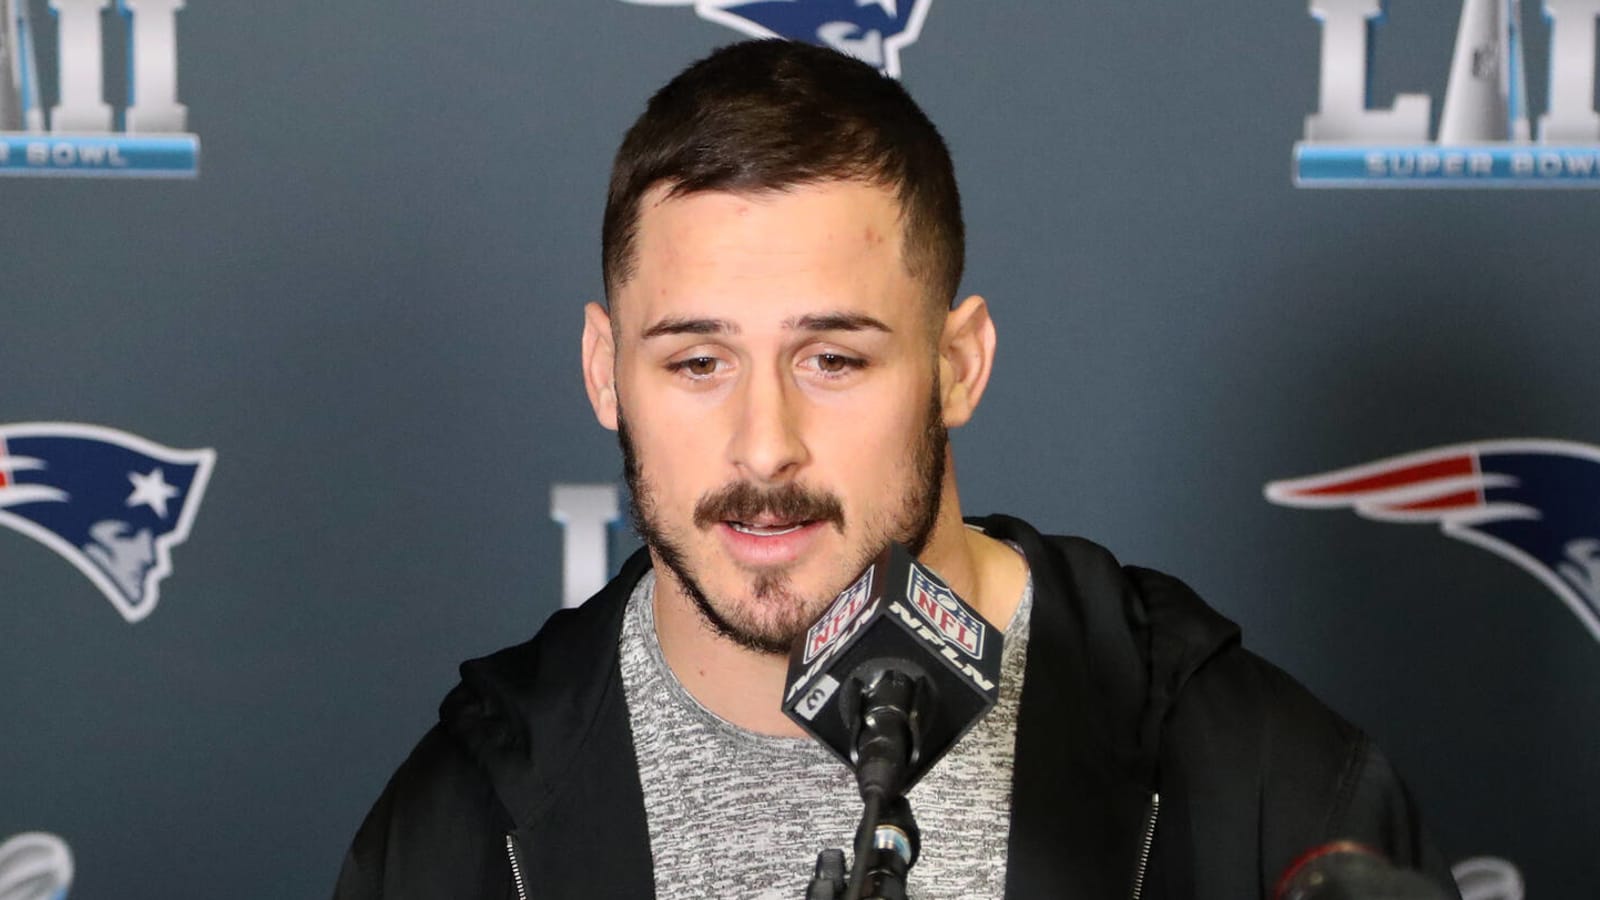 Danny Amendola retiring from the NFL